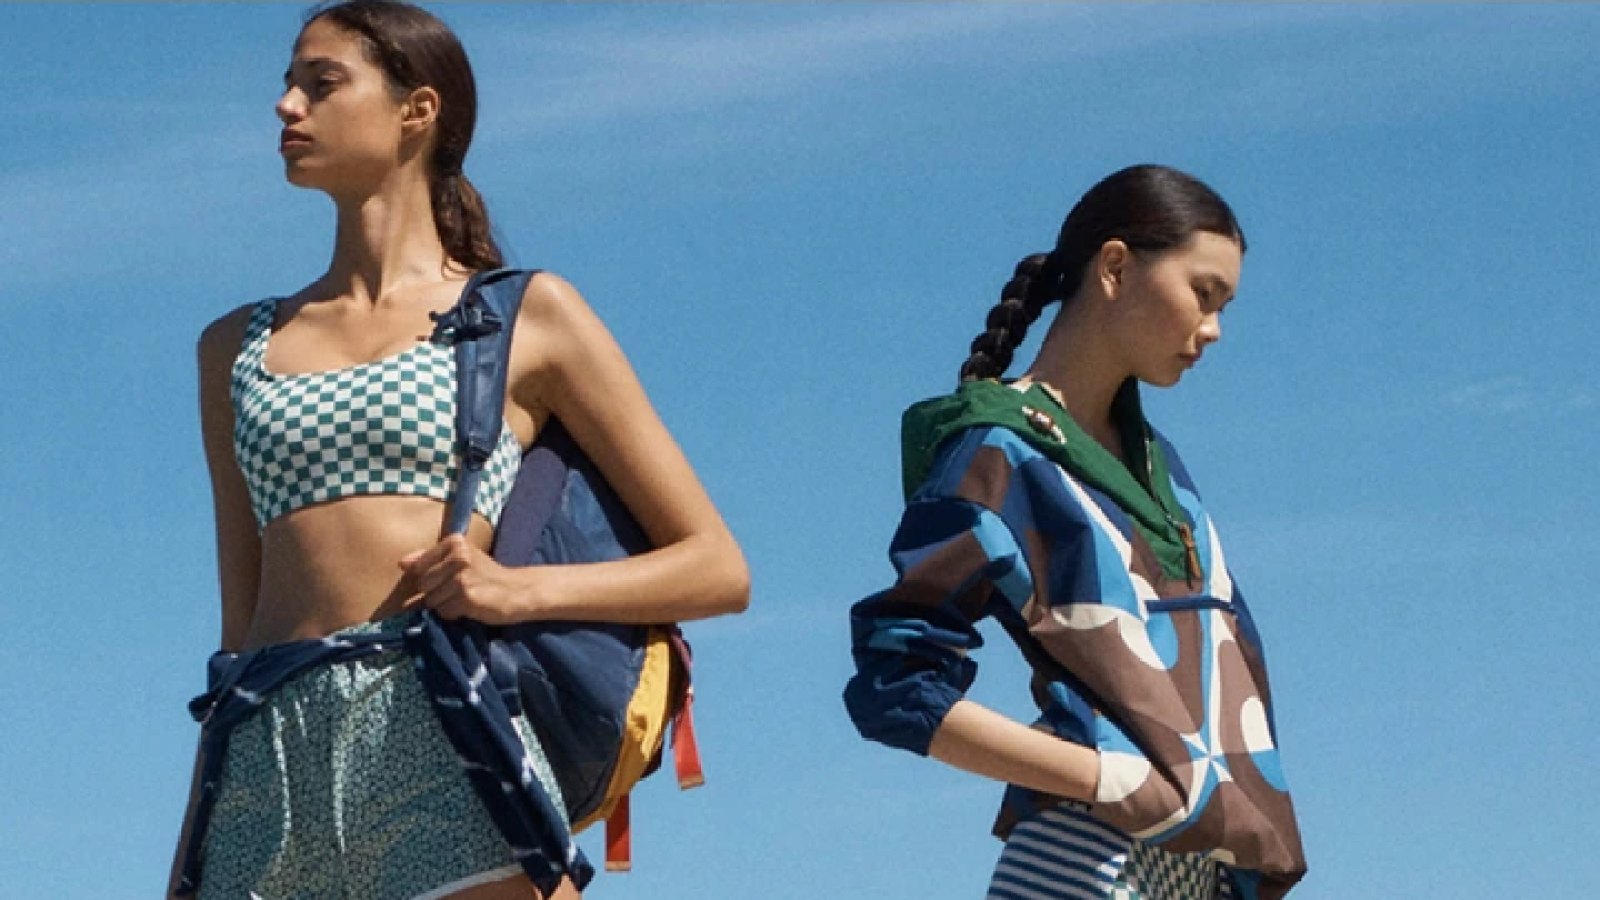 Our Top Athleisure Picks From the Tory Burch Semi-Annual Sale